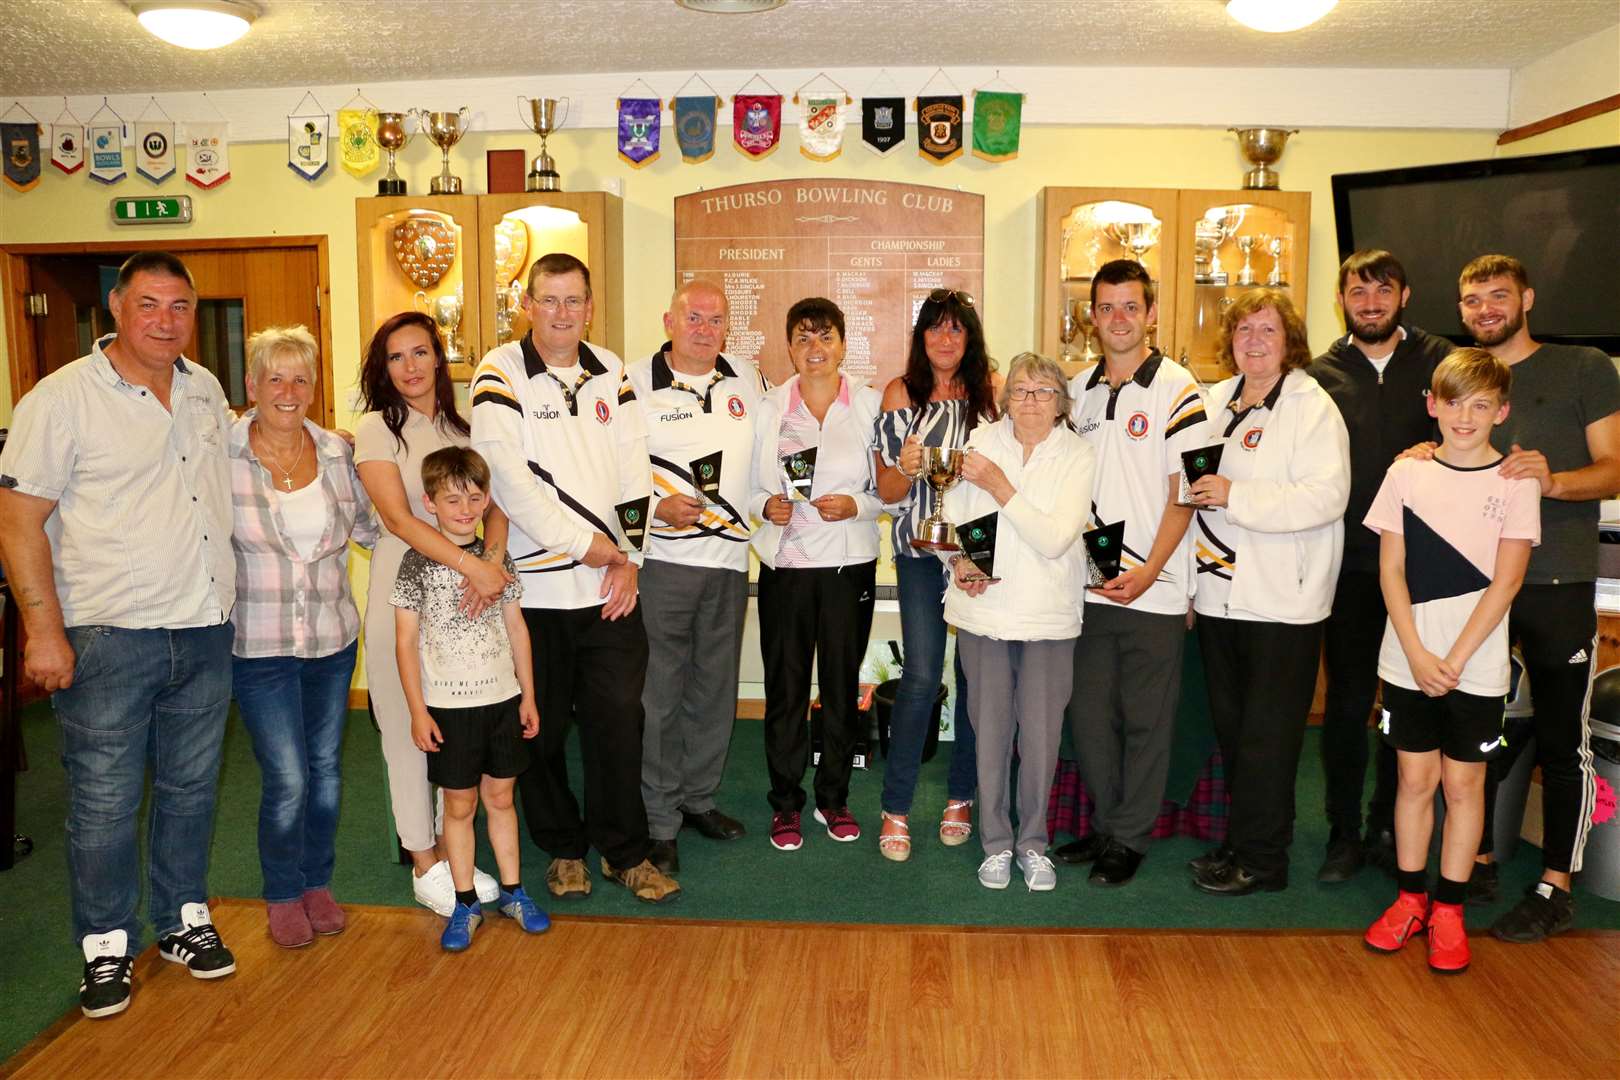 Winners and family members after the Ivy Macleod Memorial Open Triples at Thurso Bowling Club.